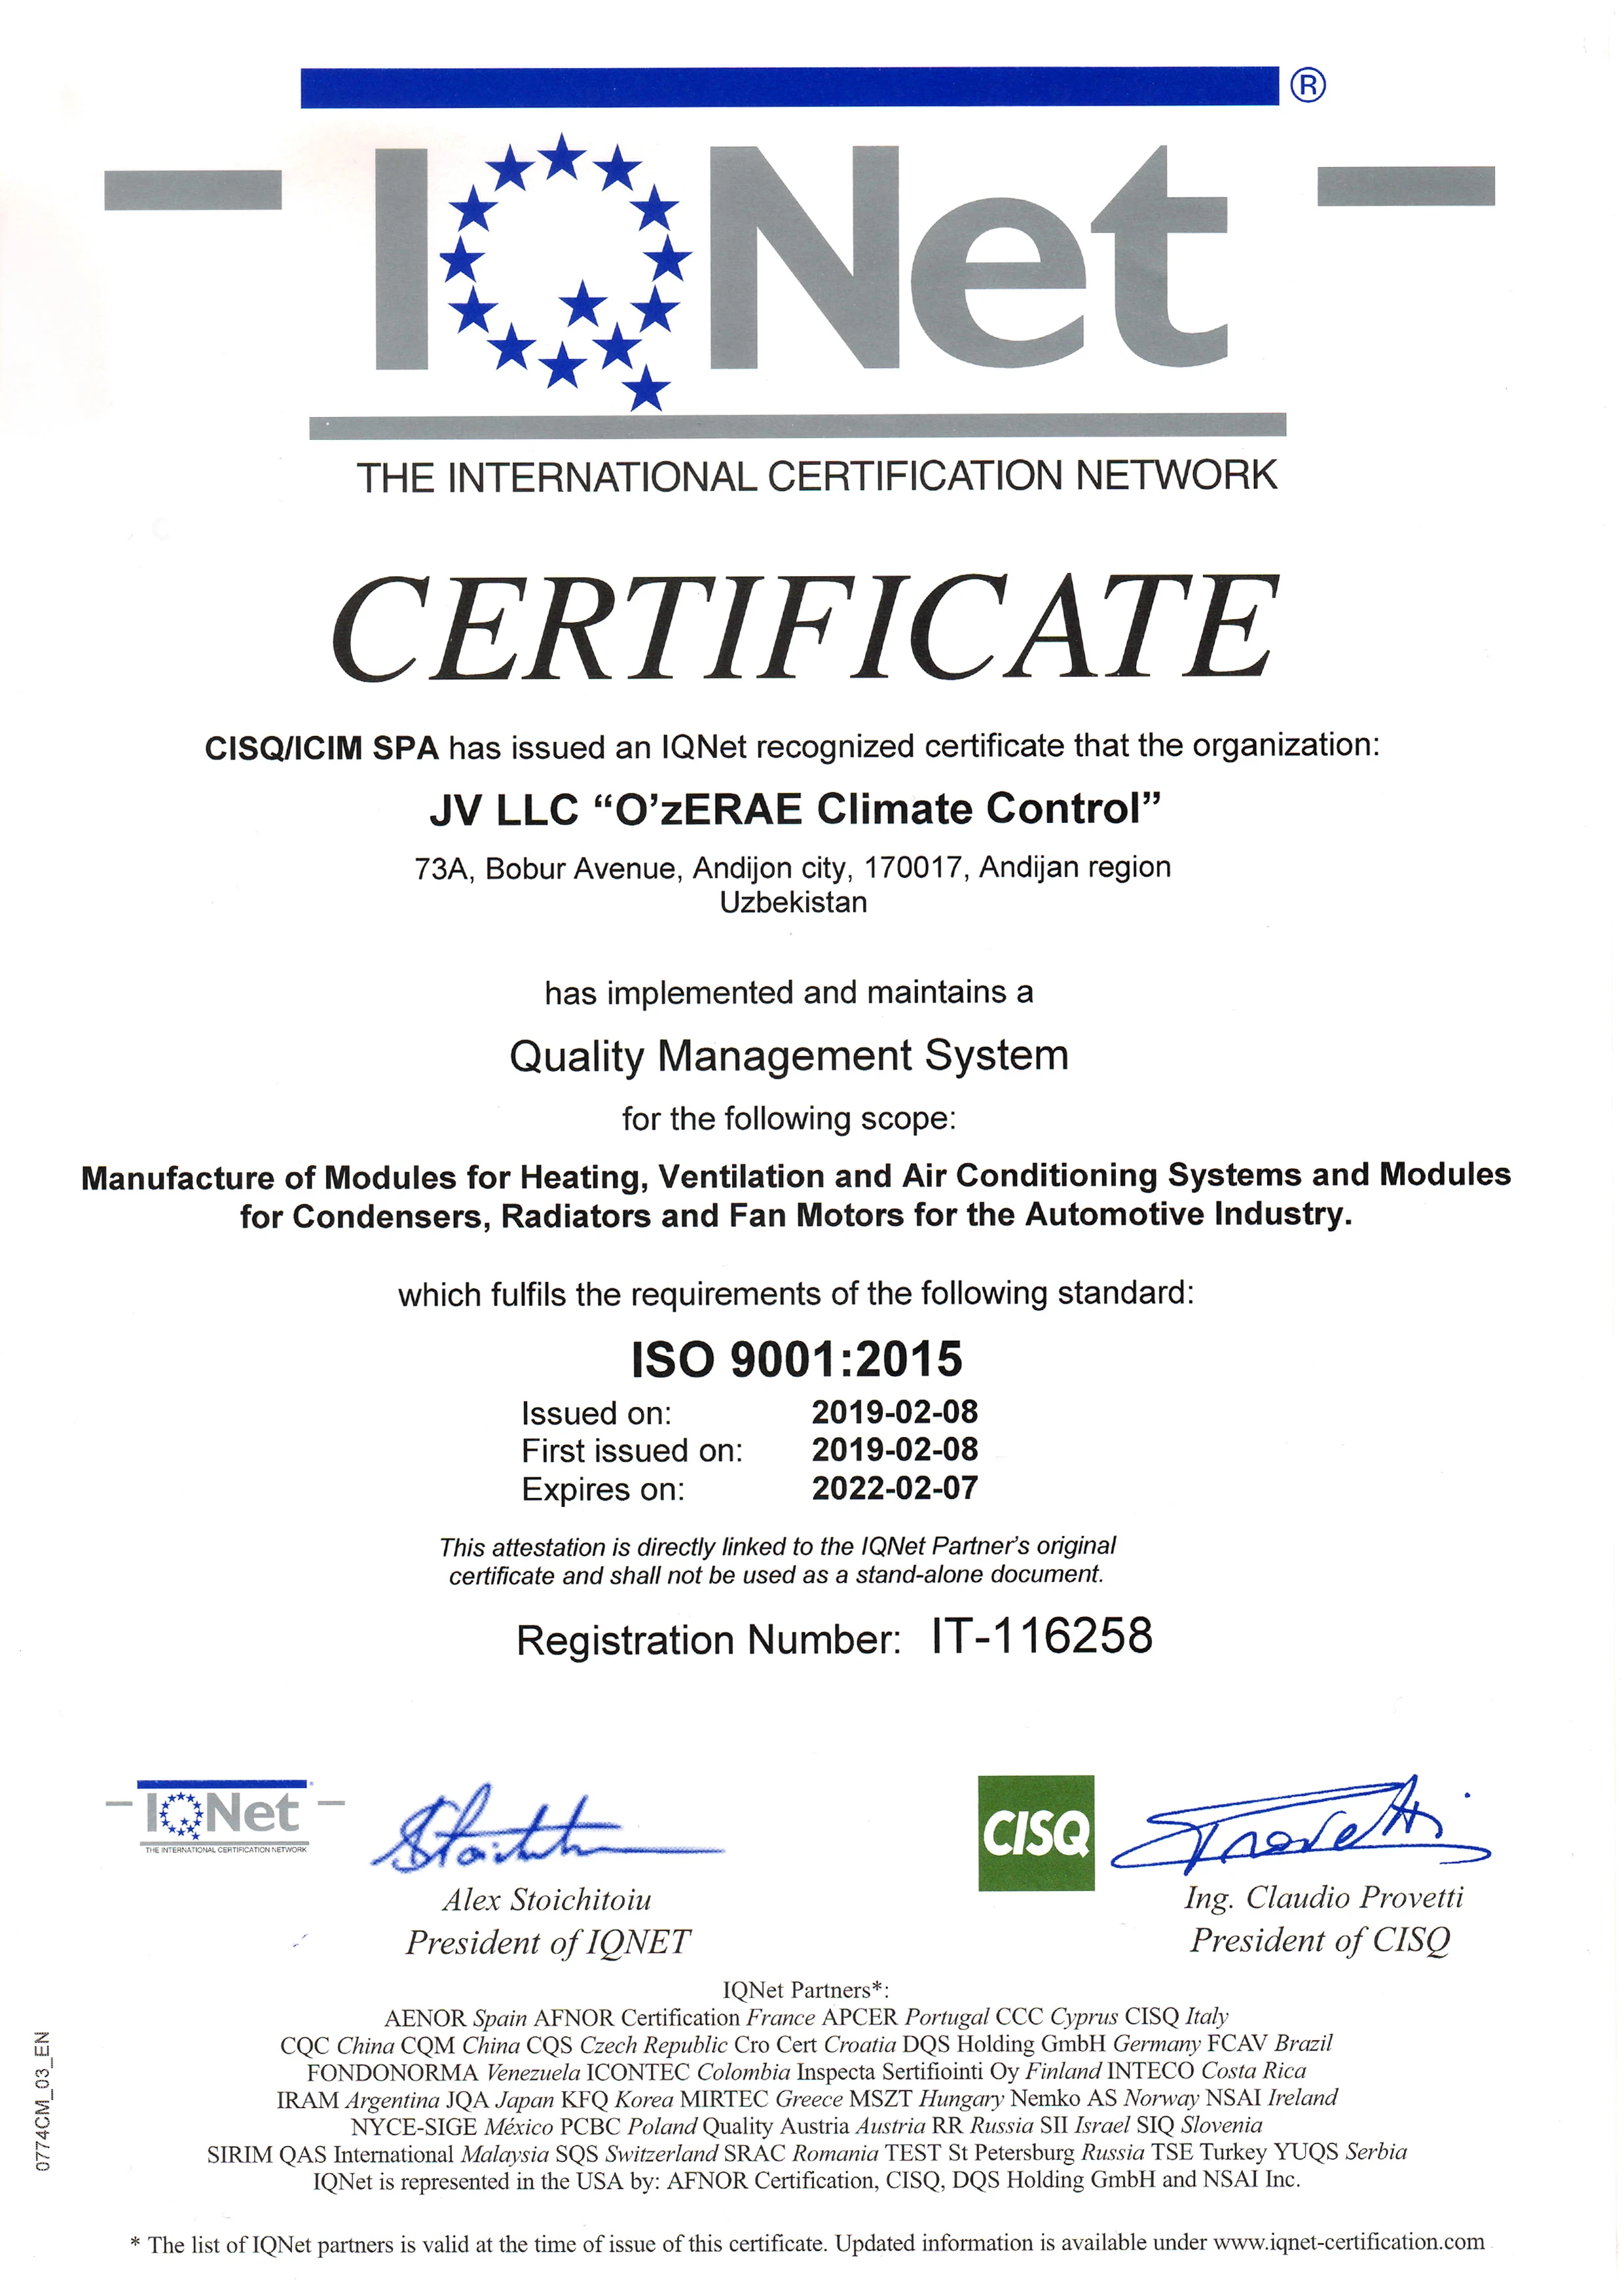 The management system certification body  DQS QUALITY SYSTEMS was successfully conducted a certification audit of the JV O'zERAE Climate Control LLC according to the ISO 5000